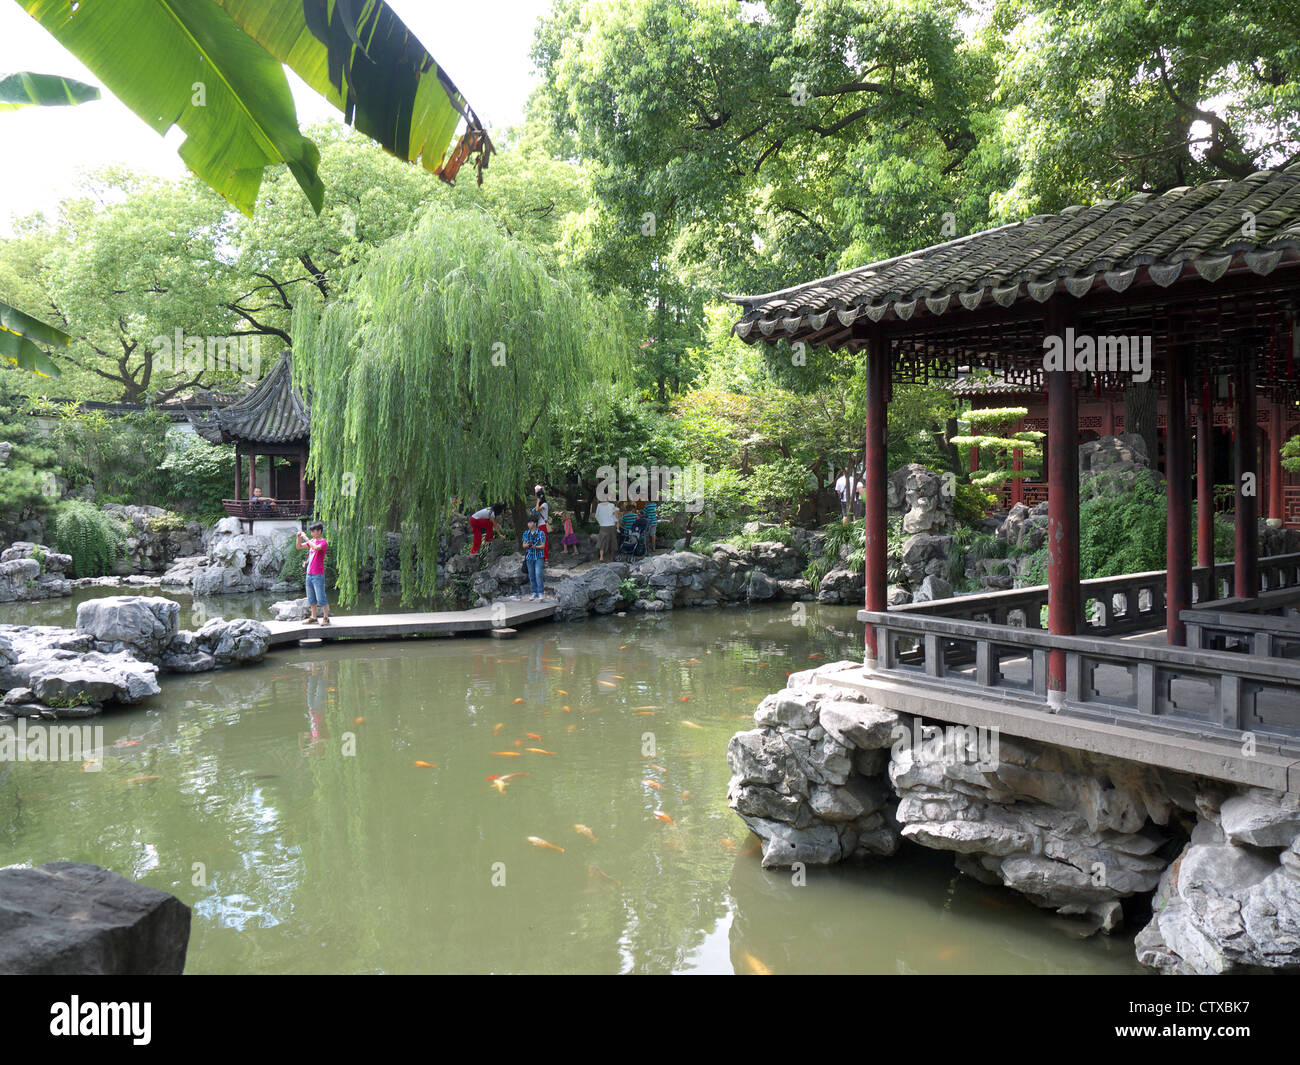 View of a large pond in the Yuyuan Garden Shanghai China Stock Photo